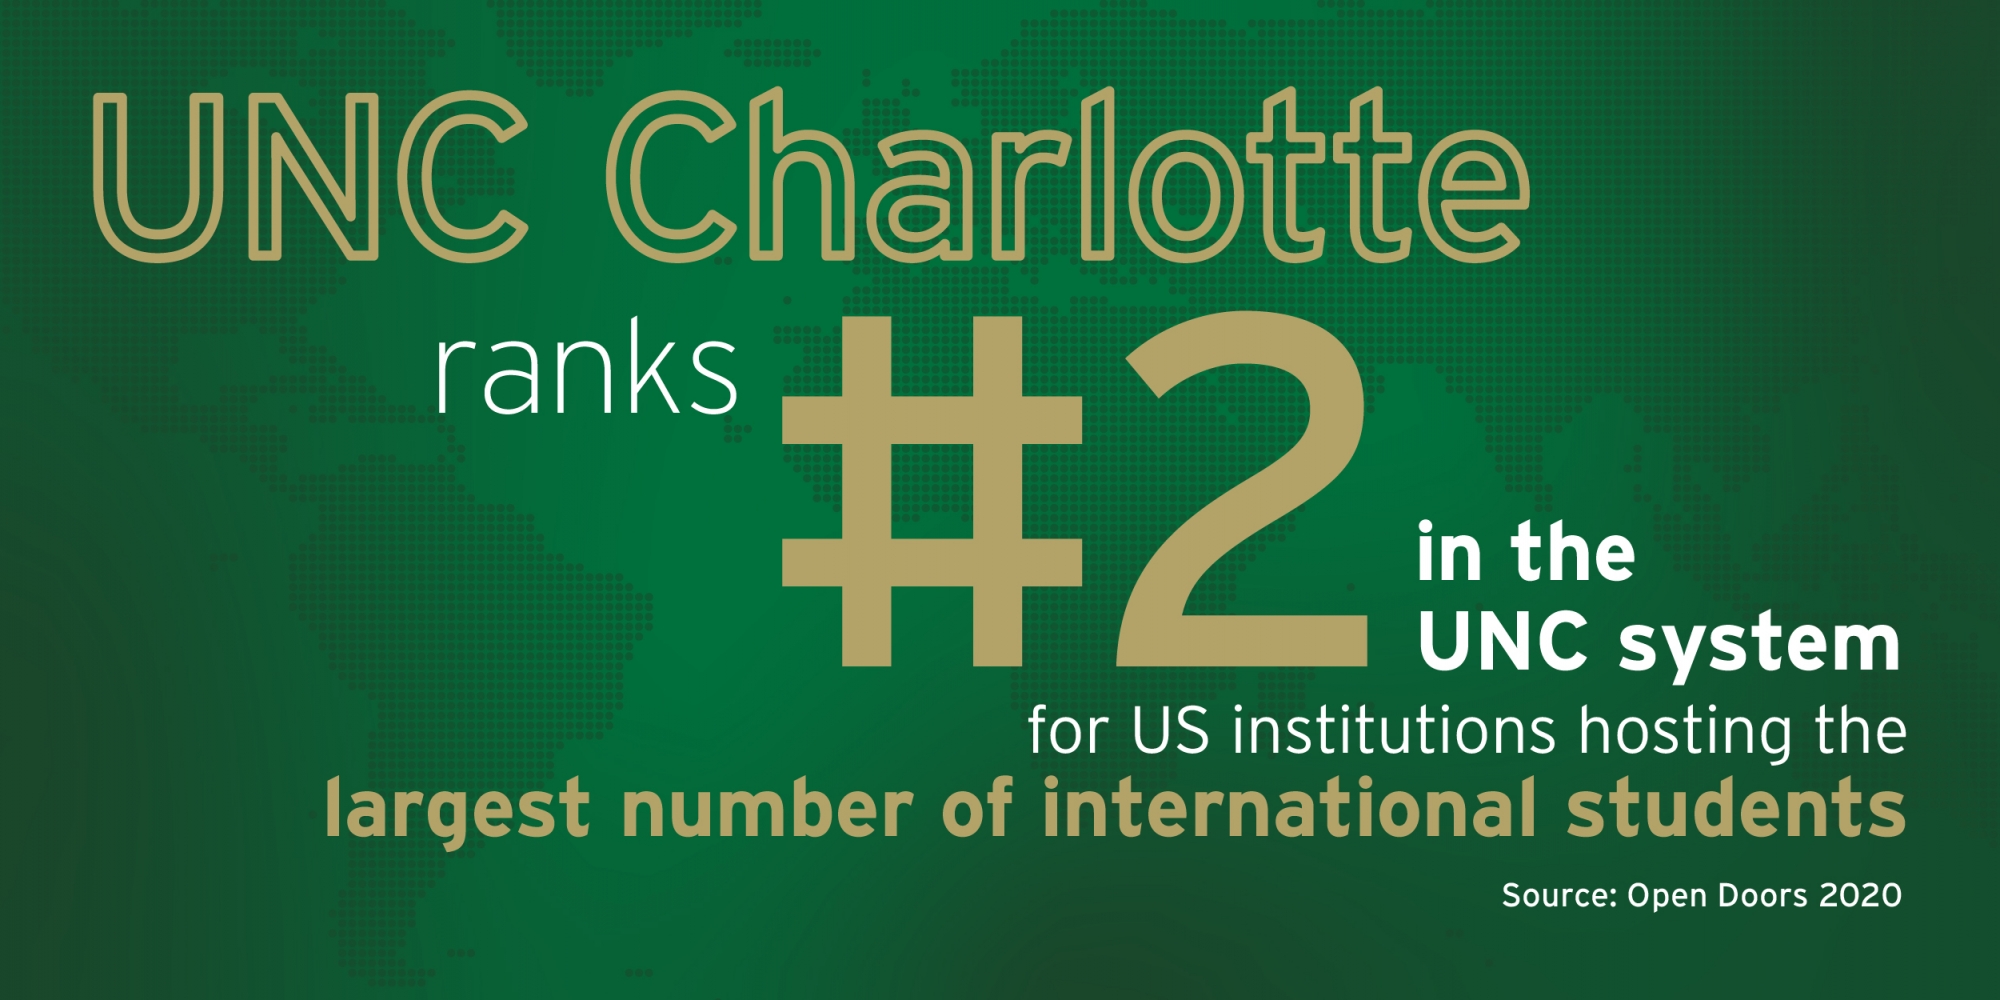 UNC Charlotte ranks second in the UNC System for institutions hosting the largest number of international students